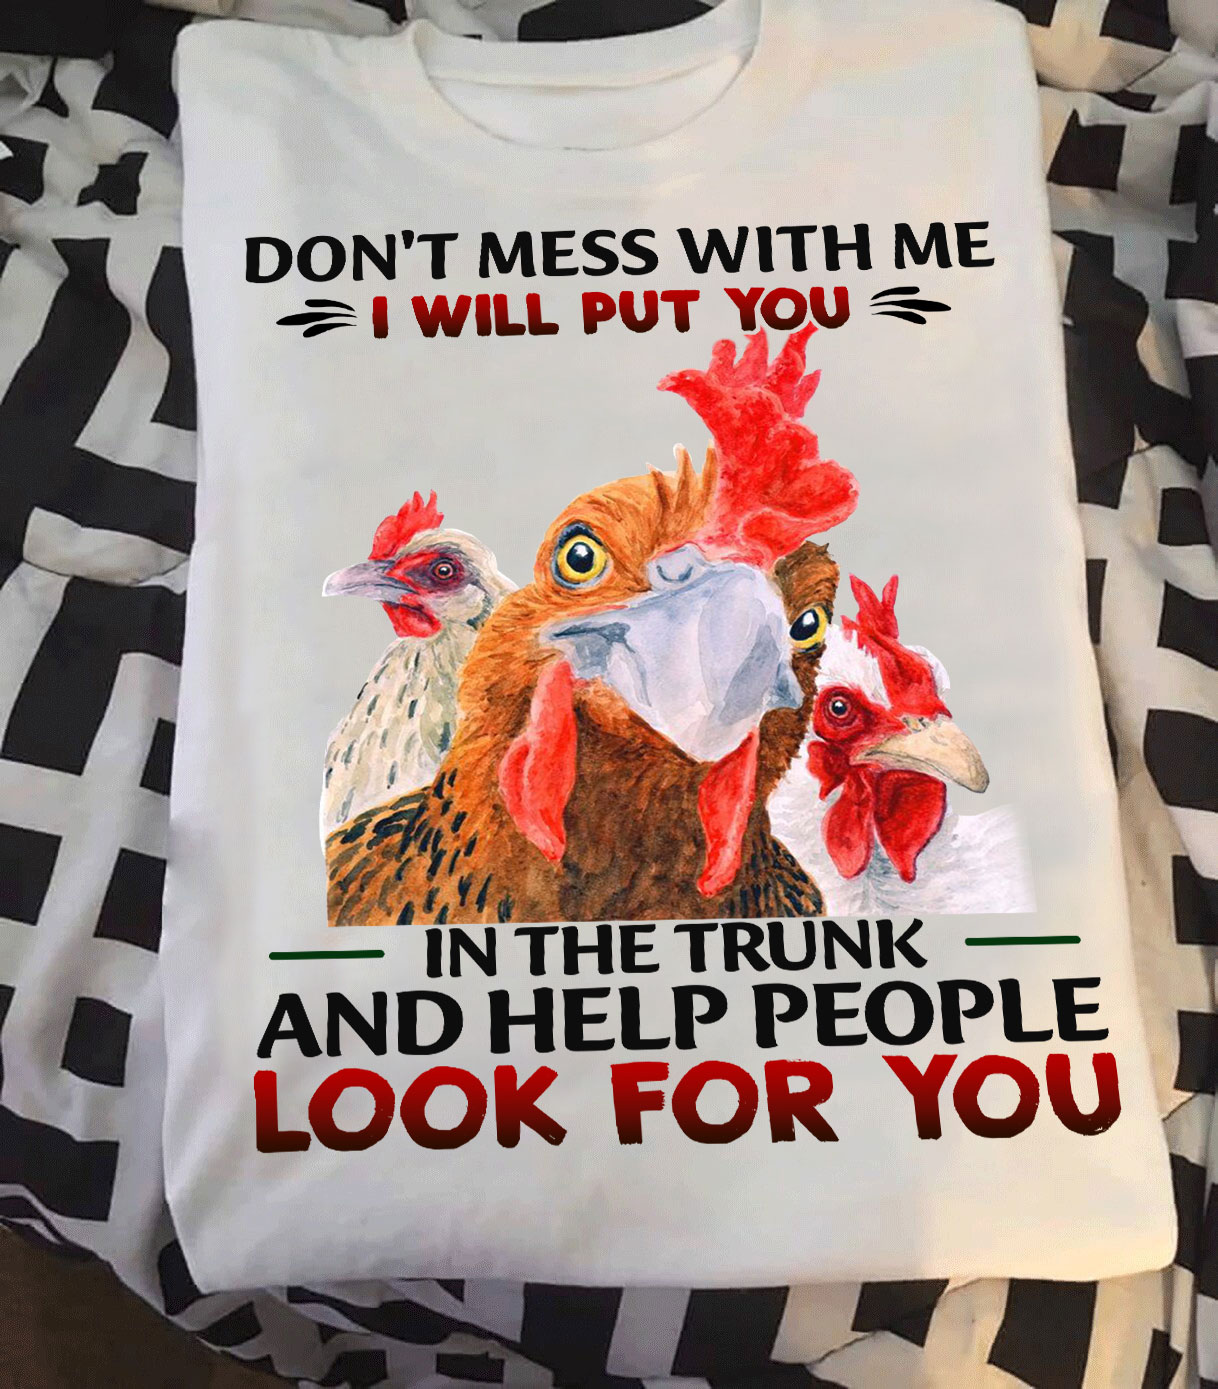 Don't mess with me I will put you in the trunk and help people look for you - Chicken